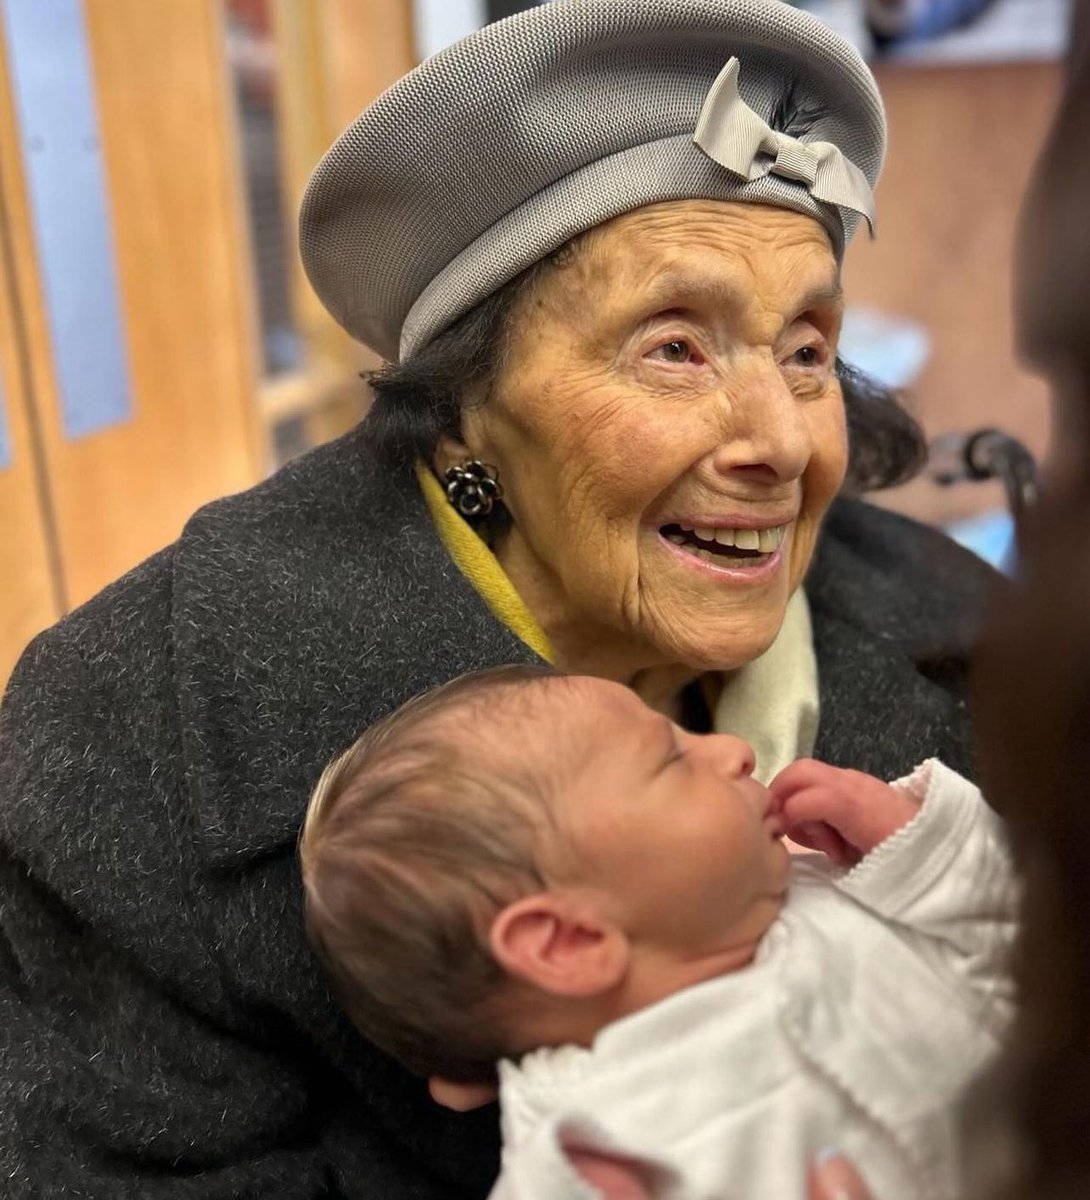 This week, my great-grandma, Lily Ebert, a 100-year-old Auschwitz survivor, became a great-great-grandma. “I never expected to survive the Holocaust. Now I have five beautiful generations. The Nazis did not win!” From near-death at Auschwitz to five generations of Jewish life.